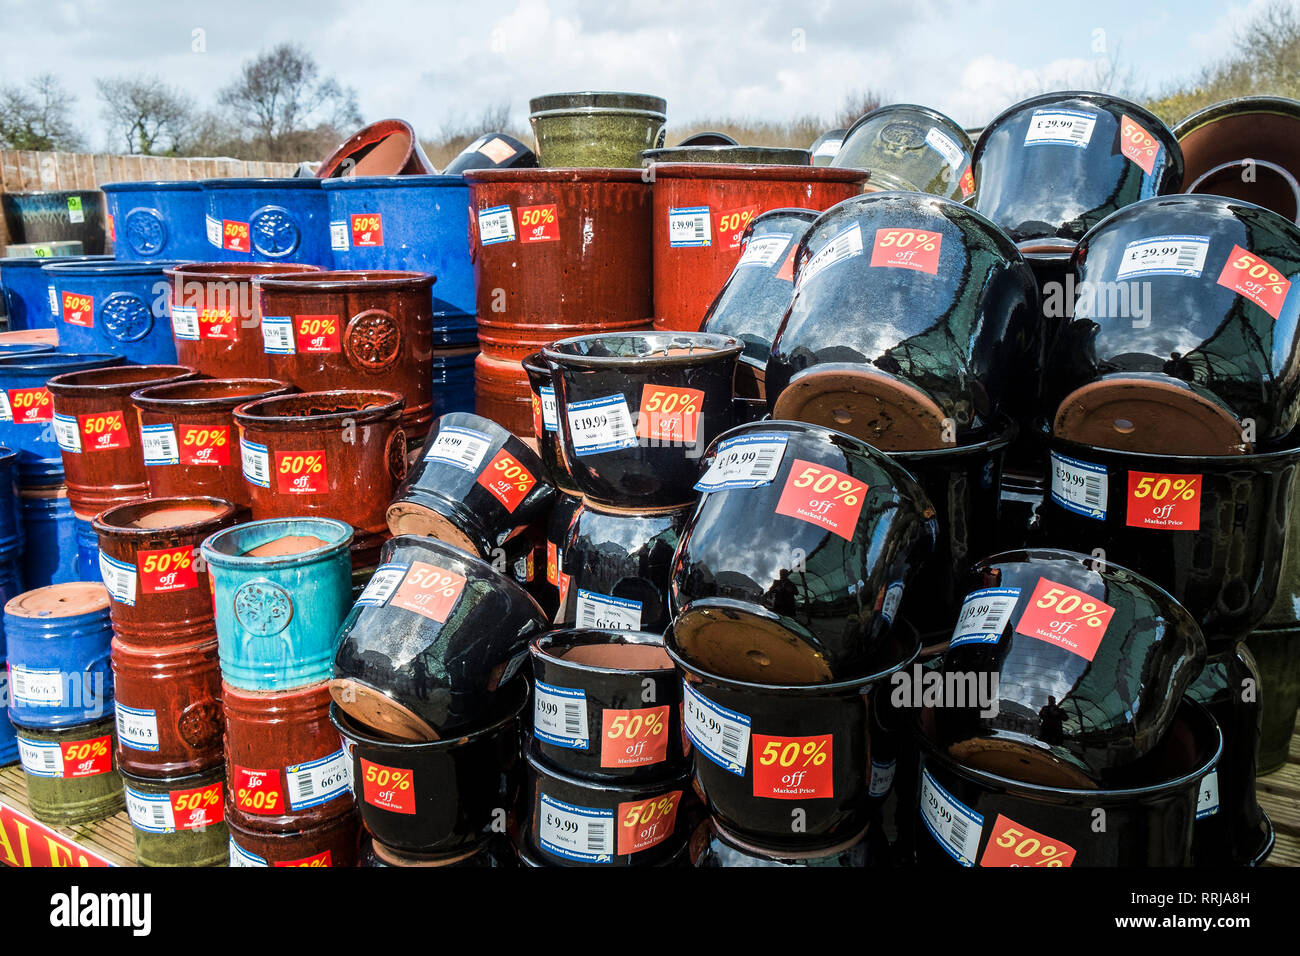 Ceramic pots on sale at reduced prices in a garden centre. Stock Photo